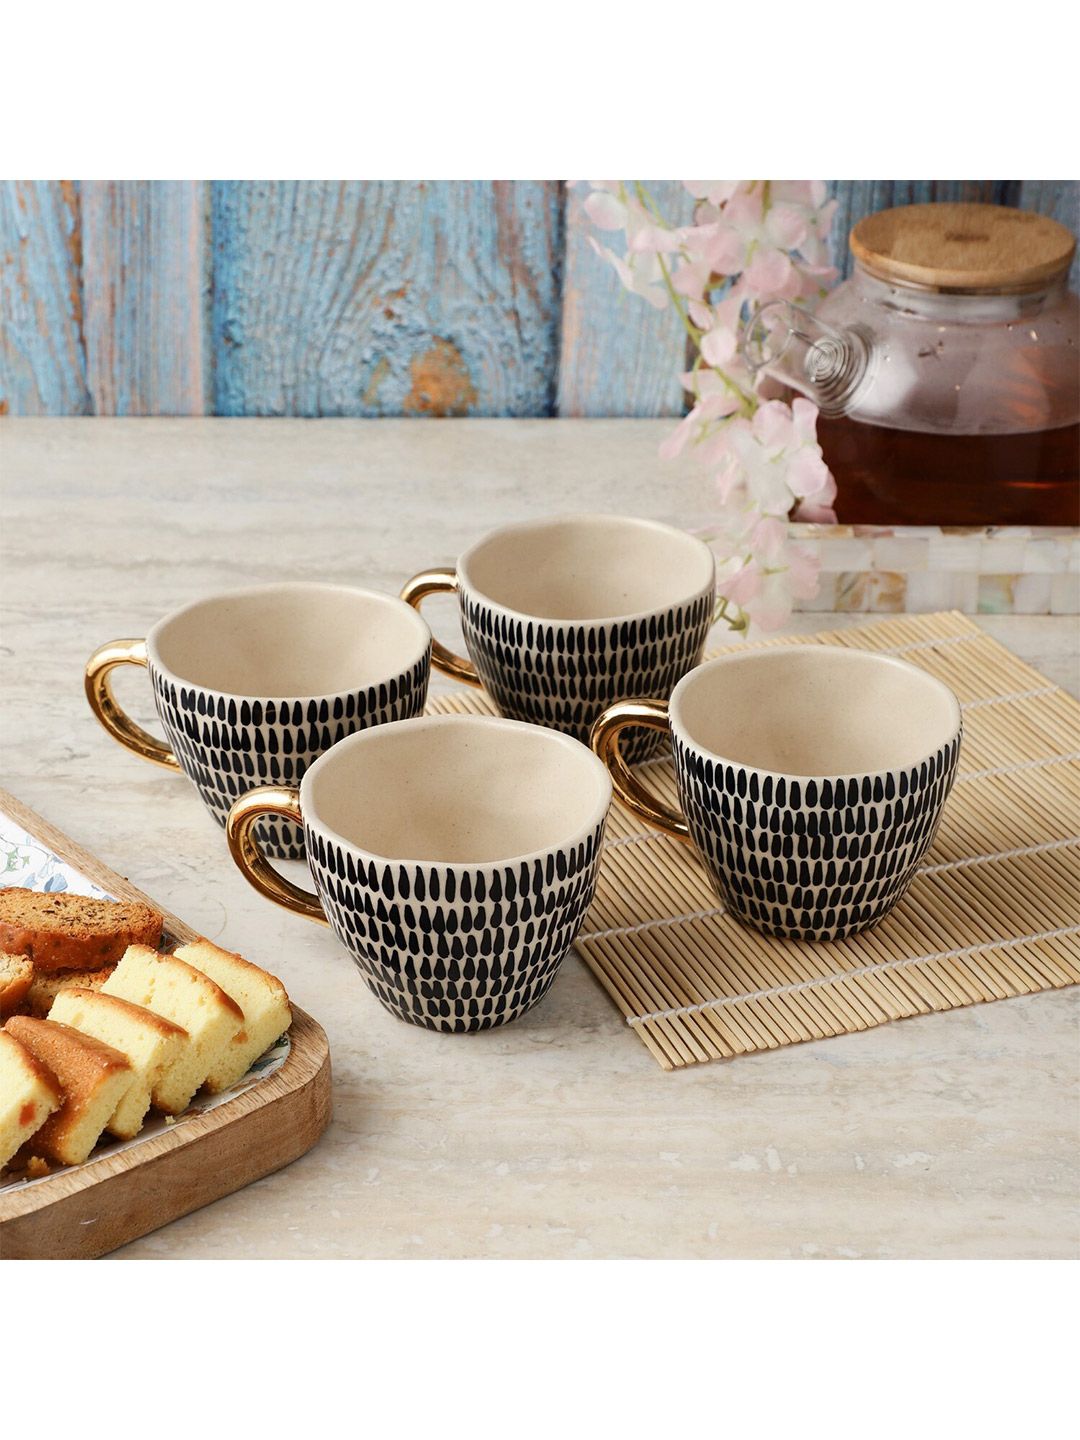 The Decor Mart White & Black Printed Ceramic Glossy Mugs Set of Cups and Mugs Price in India